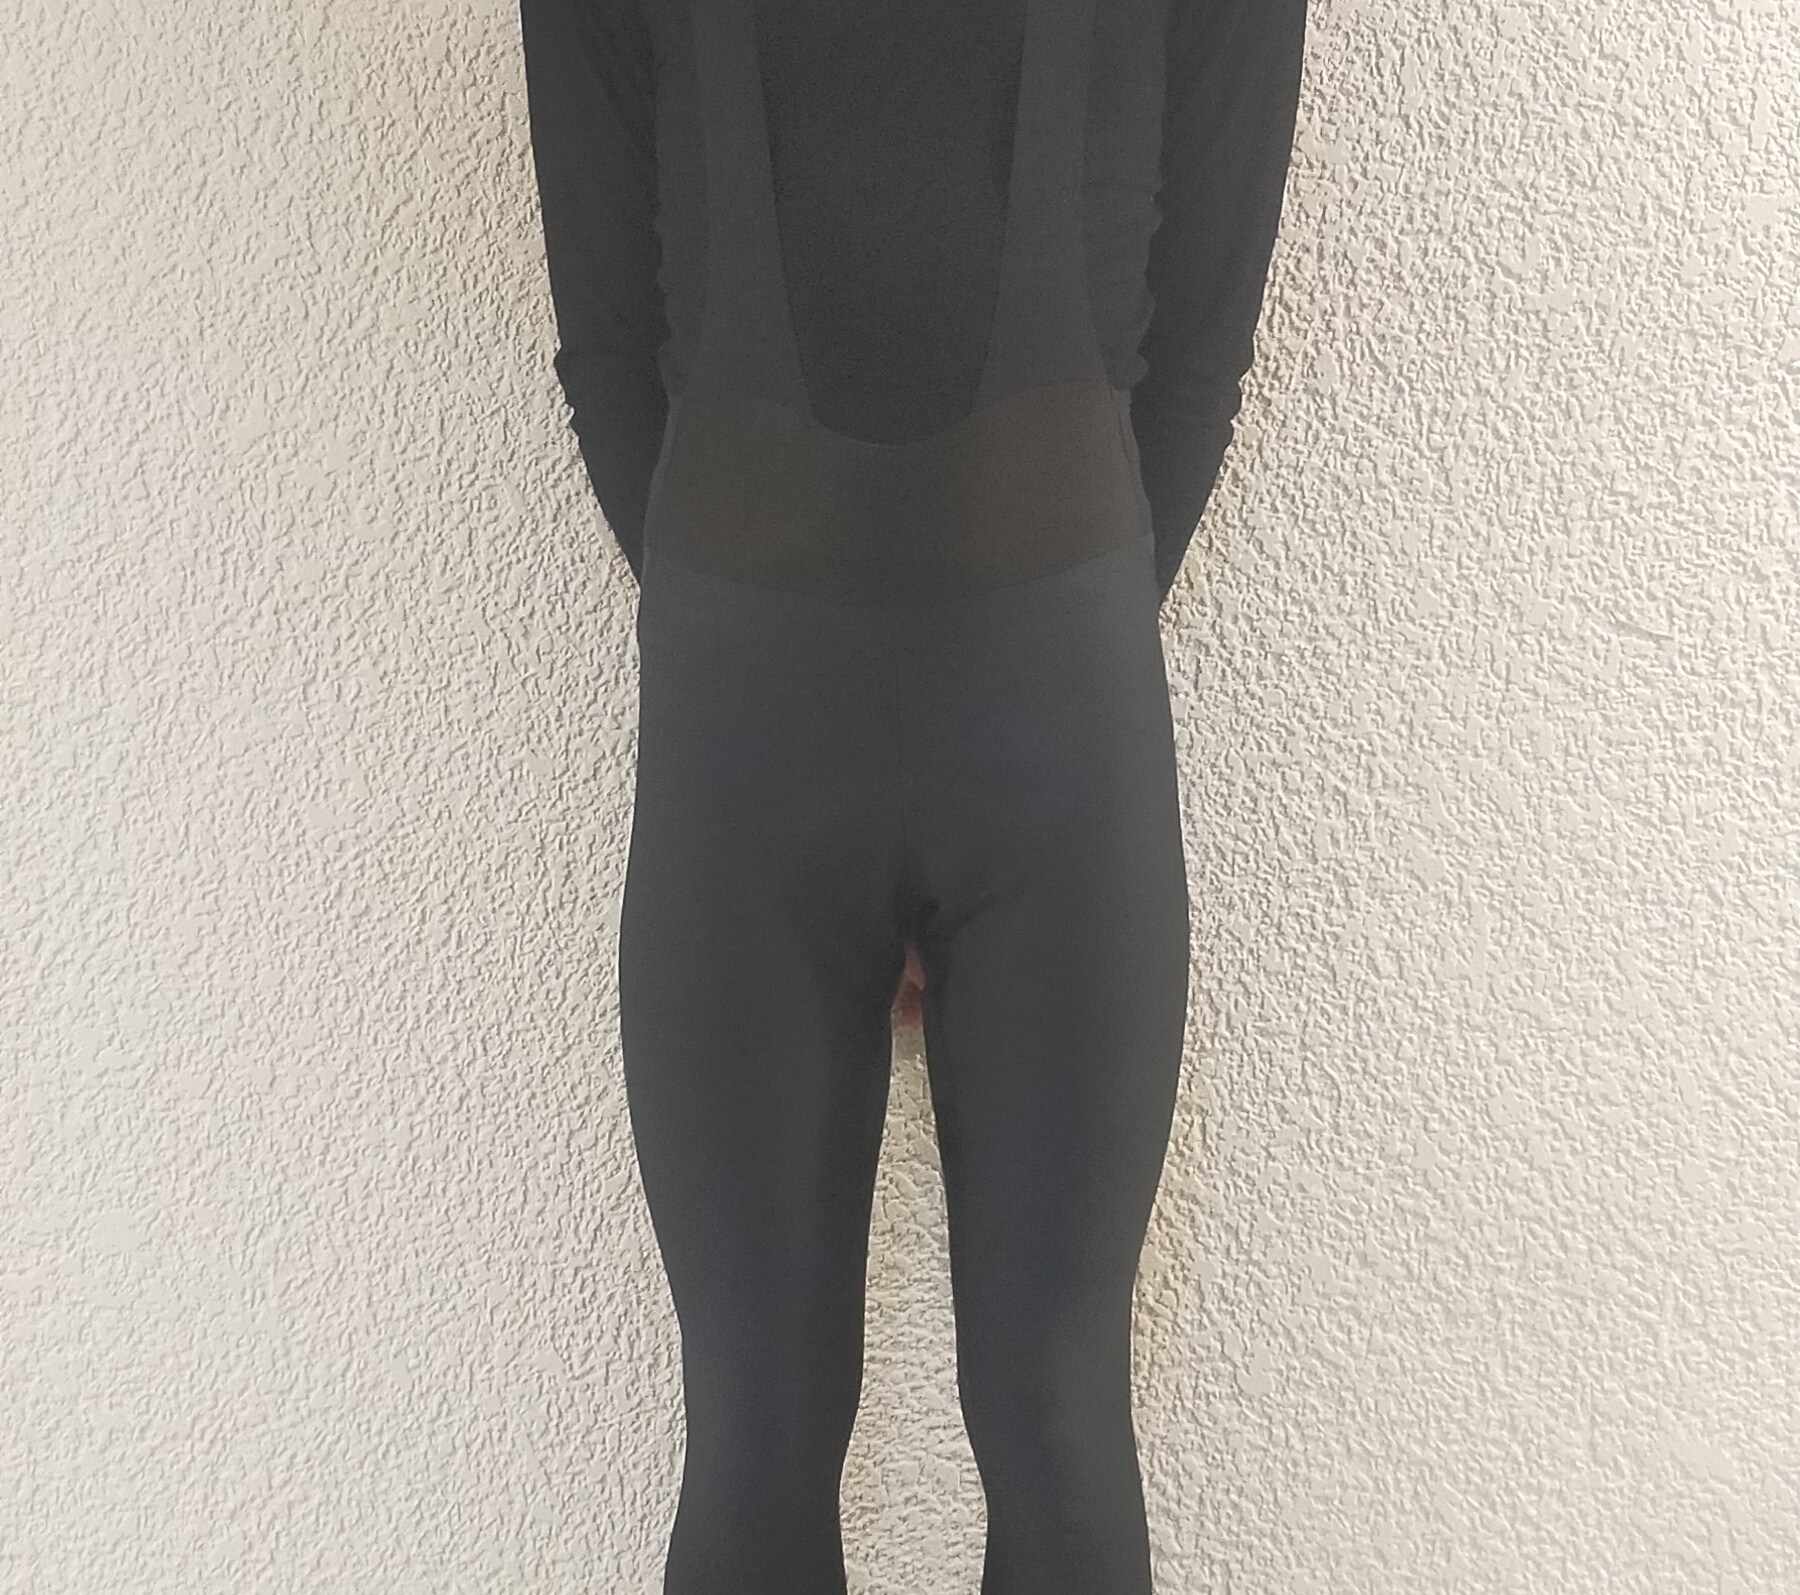 Details about   Pearl Izumi 11112026 Men's Thermal Bib Tight Black Water Resistant Cycling Gear